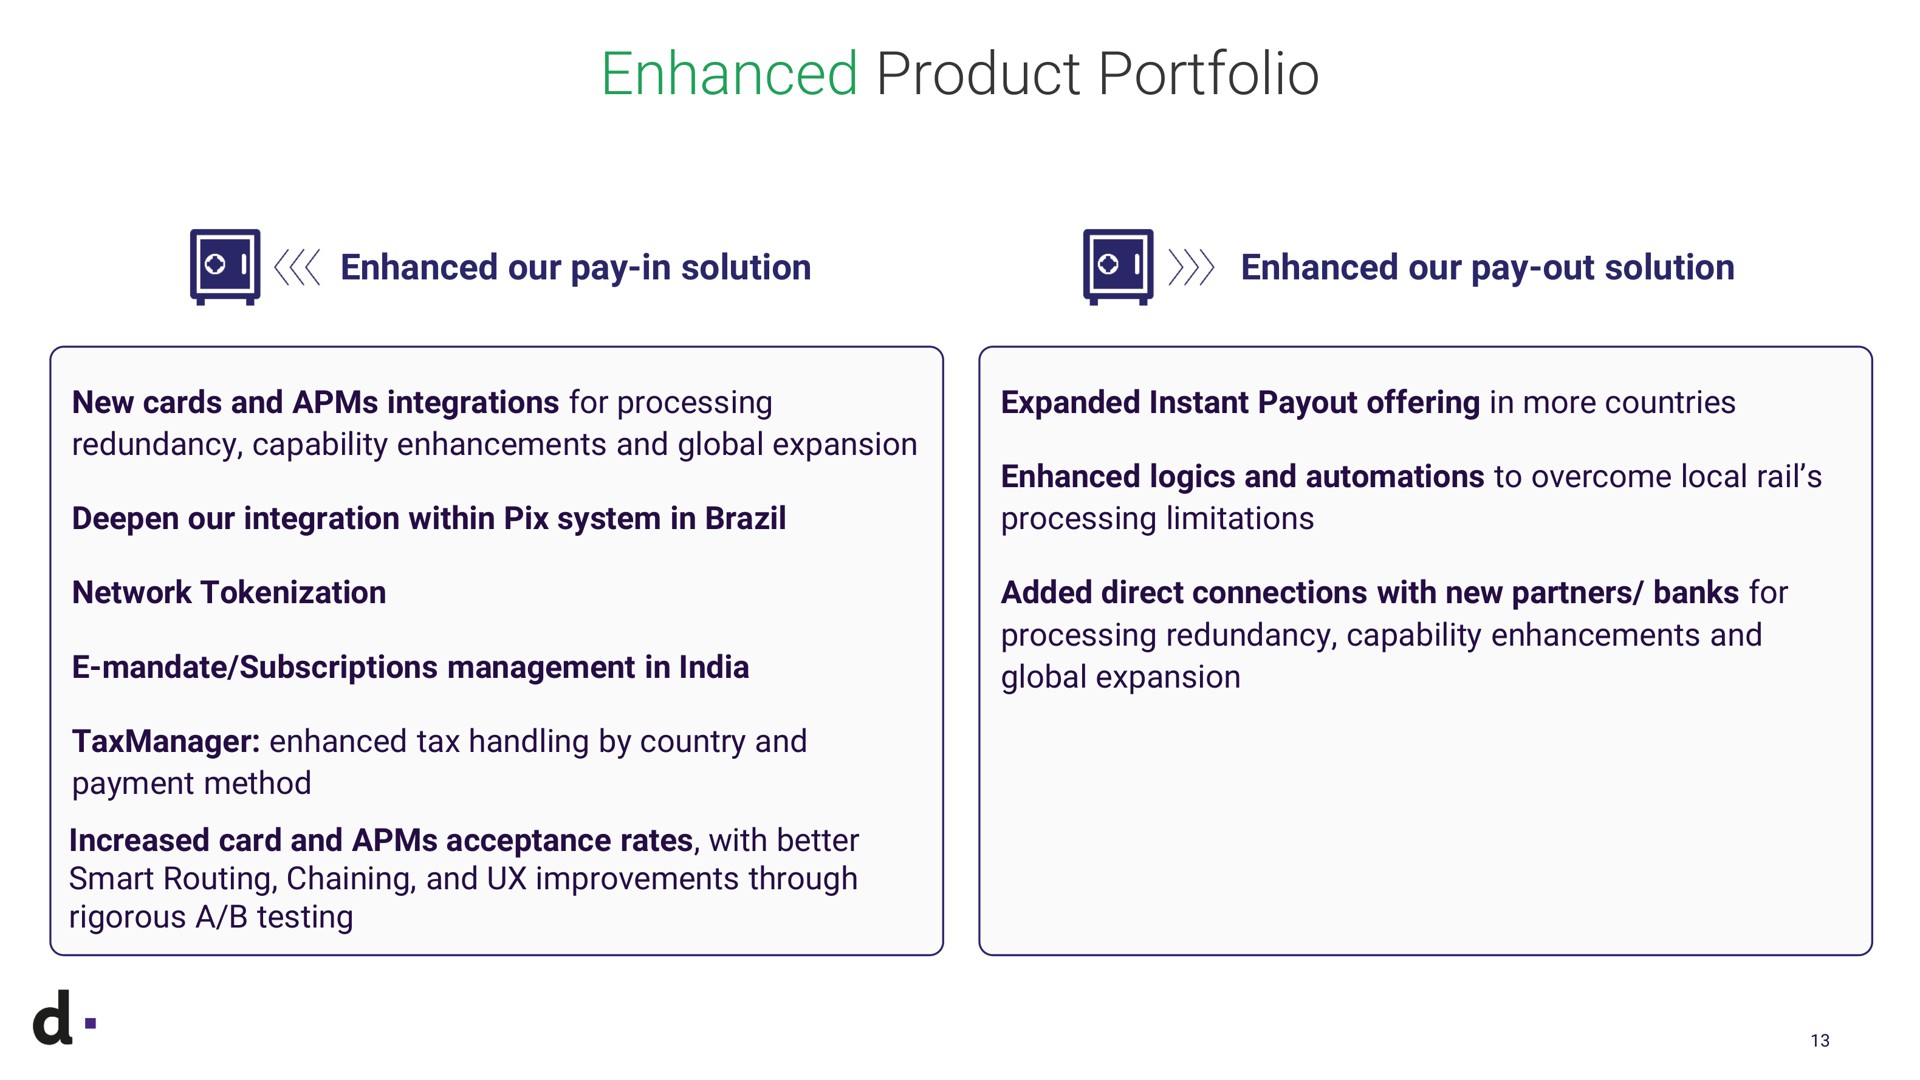 enhanced product portfolio our pay in solution our pay out solution new cards and integrations for processing redundancy capability enhancements and global expansion expanded instant offering in more countries deepen our integration within pix system in brazil network mandate subscriptions management in tax handling by country and payment method increased card and acceptance rates with better smart routing chaining and improvements through rigorous a testing logics and to overcome local rail processing limitations added direct connections with new partners banks for processing redundancy capability enhancements and global expansion | dLocal